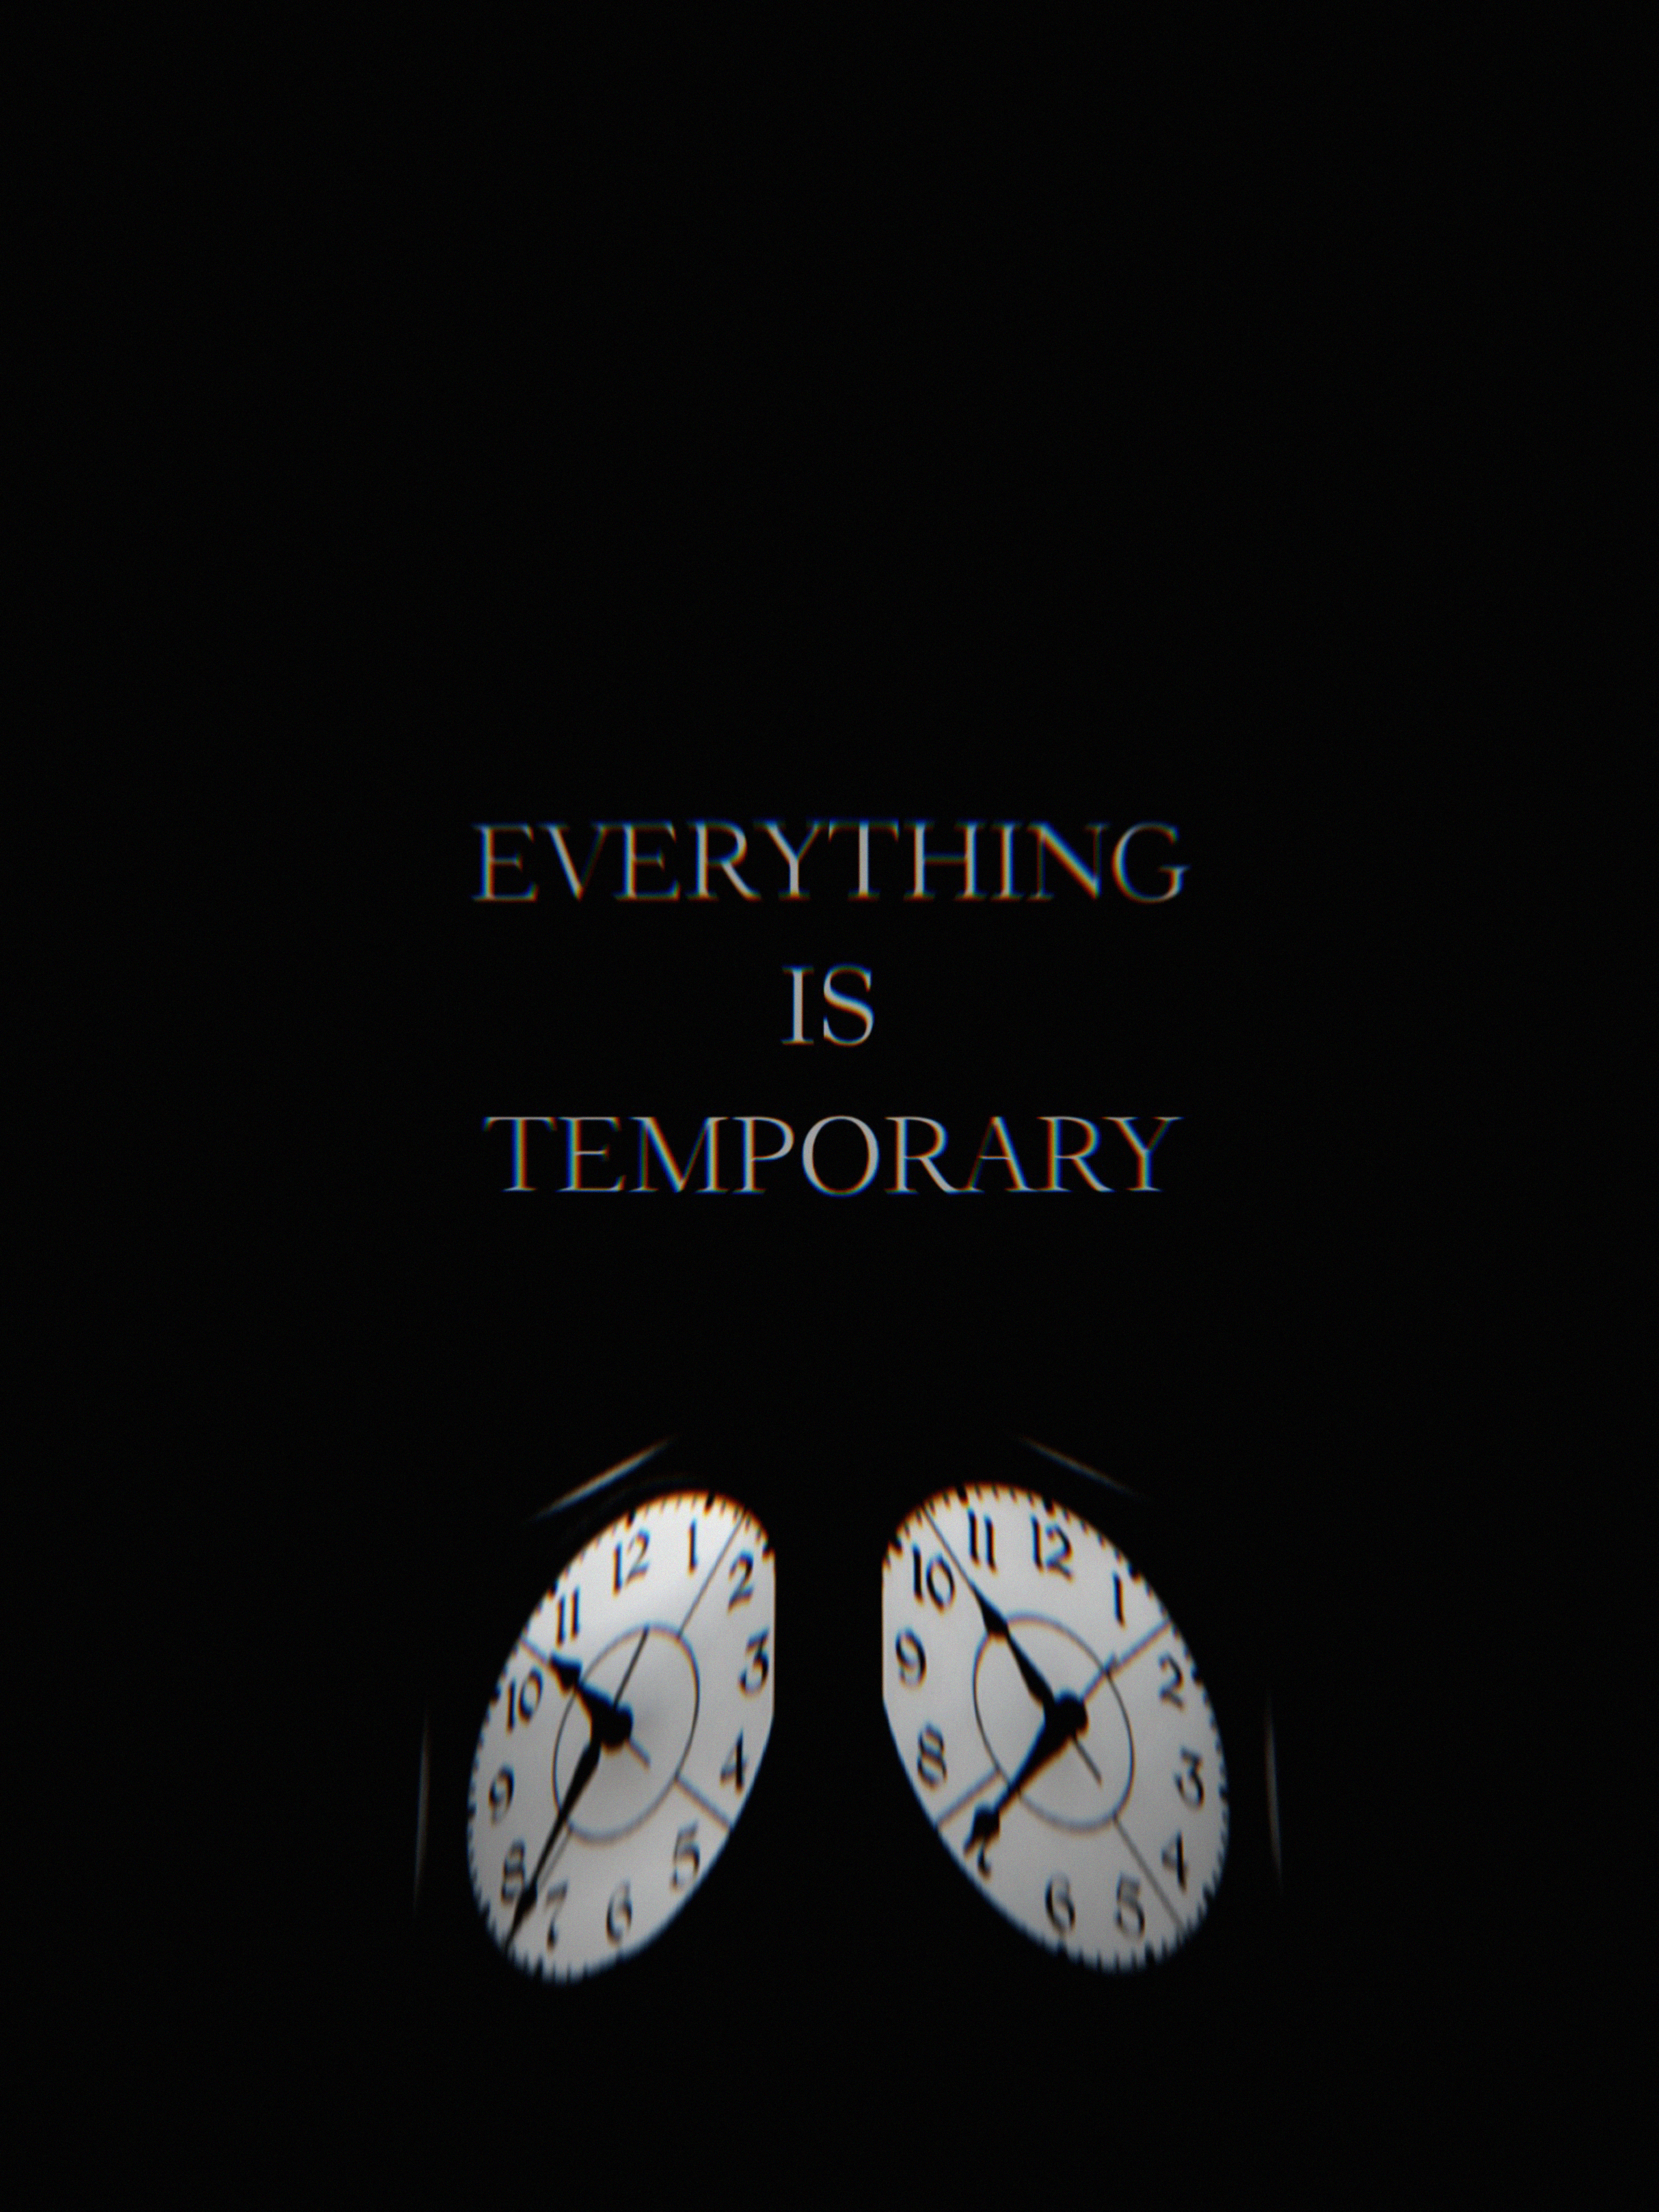 life, clock, words, glitch, time, it's time, temporary